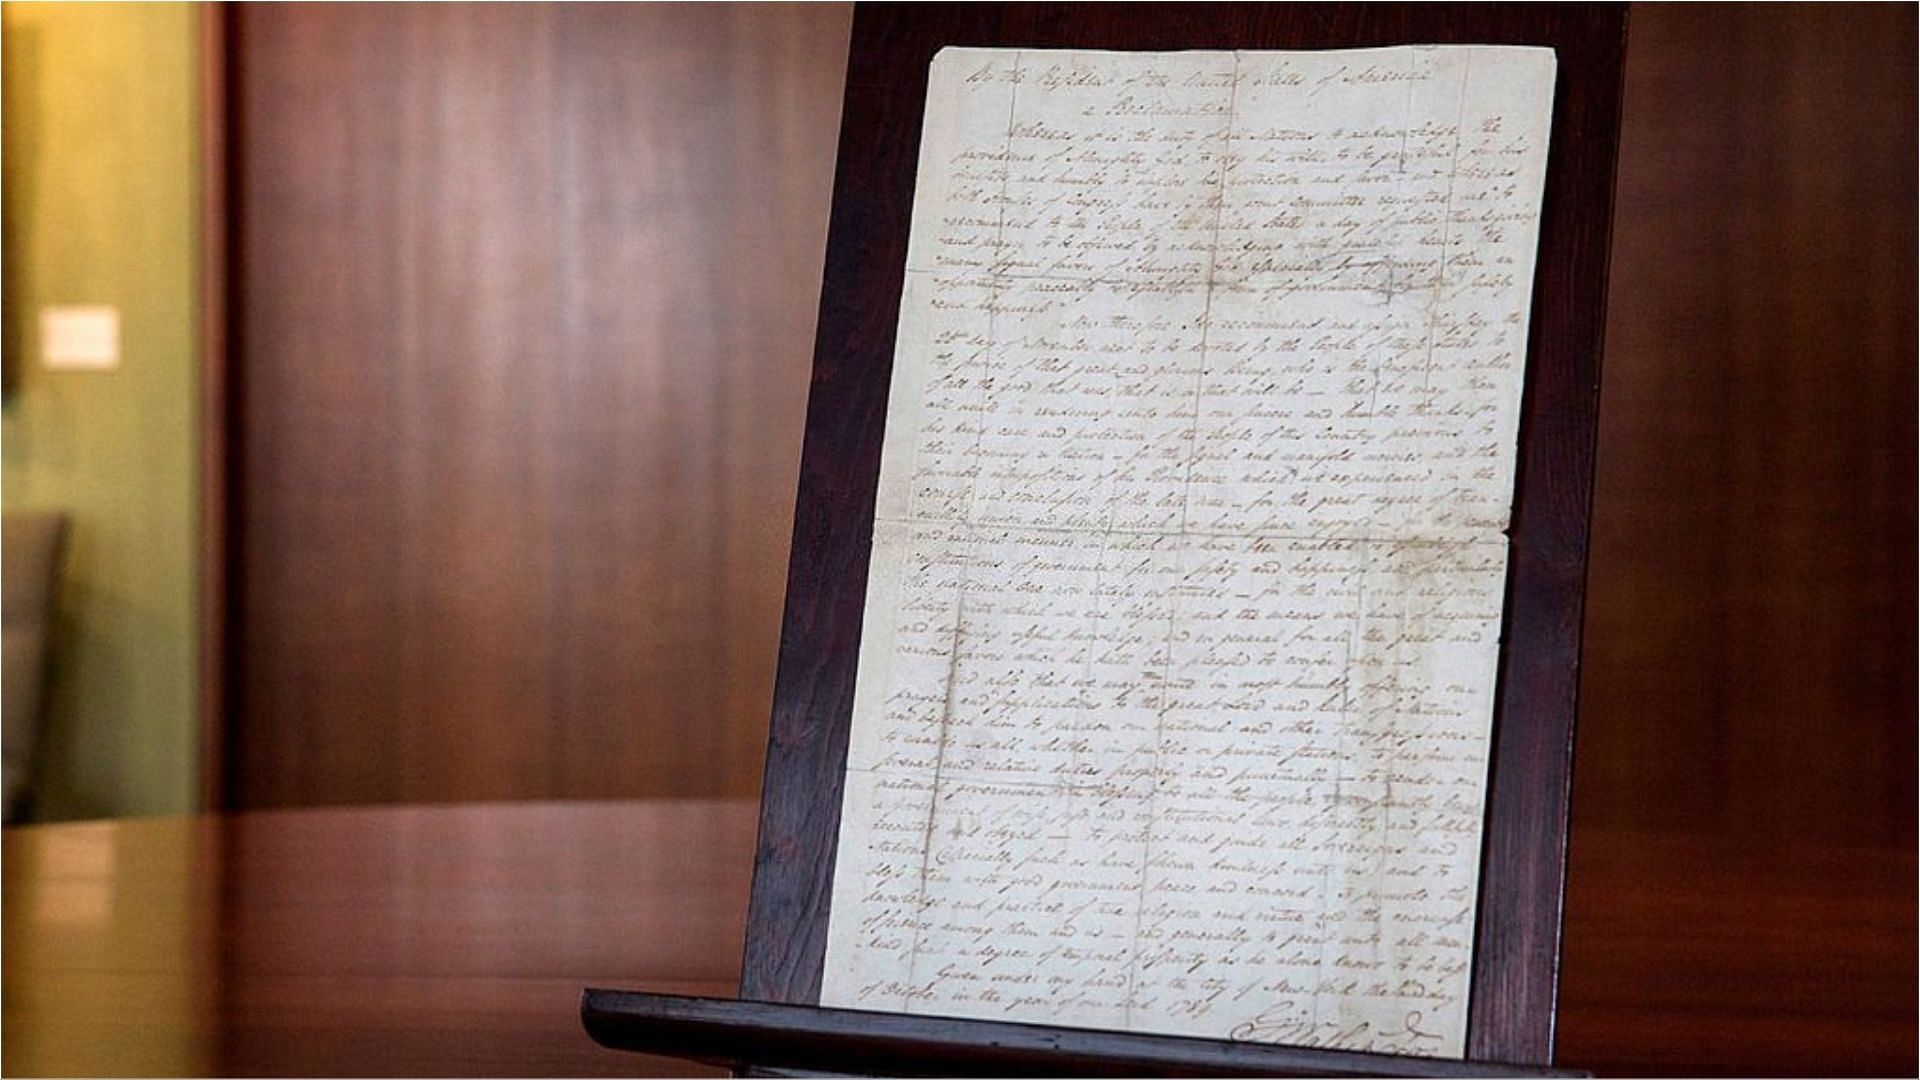 George Washington Thanksgiving Proclamation has been listed for sale (Image via Andrew Burton/Getty Images)